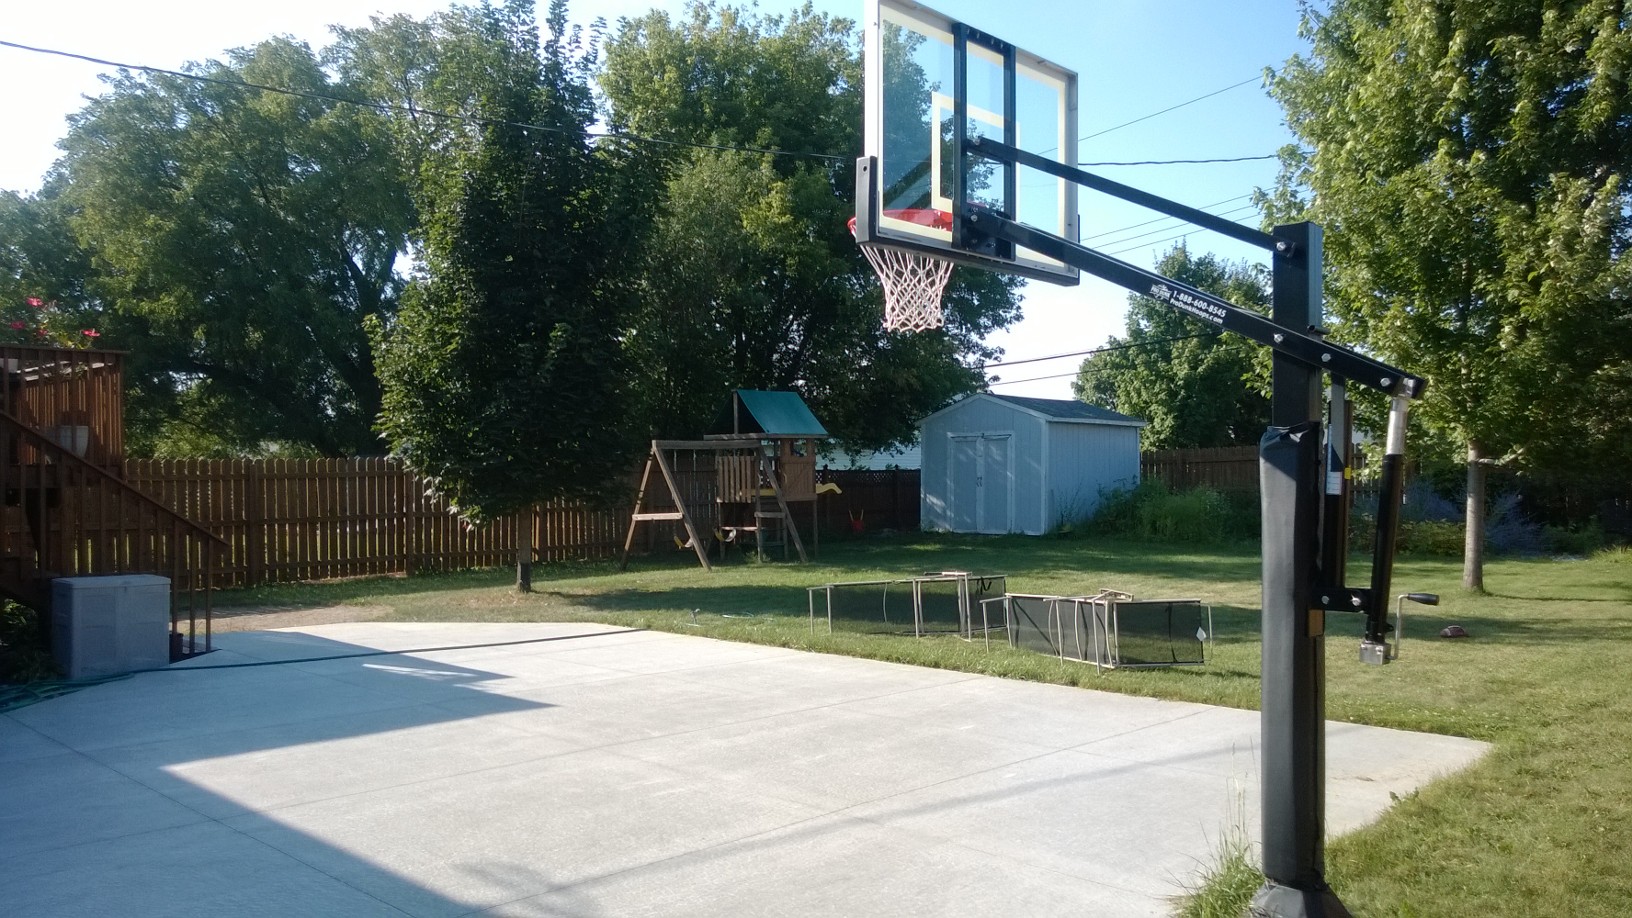 A great shot showing the whole playing area of the backyard court.